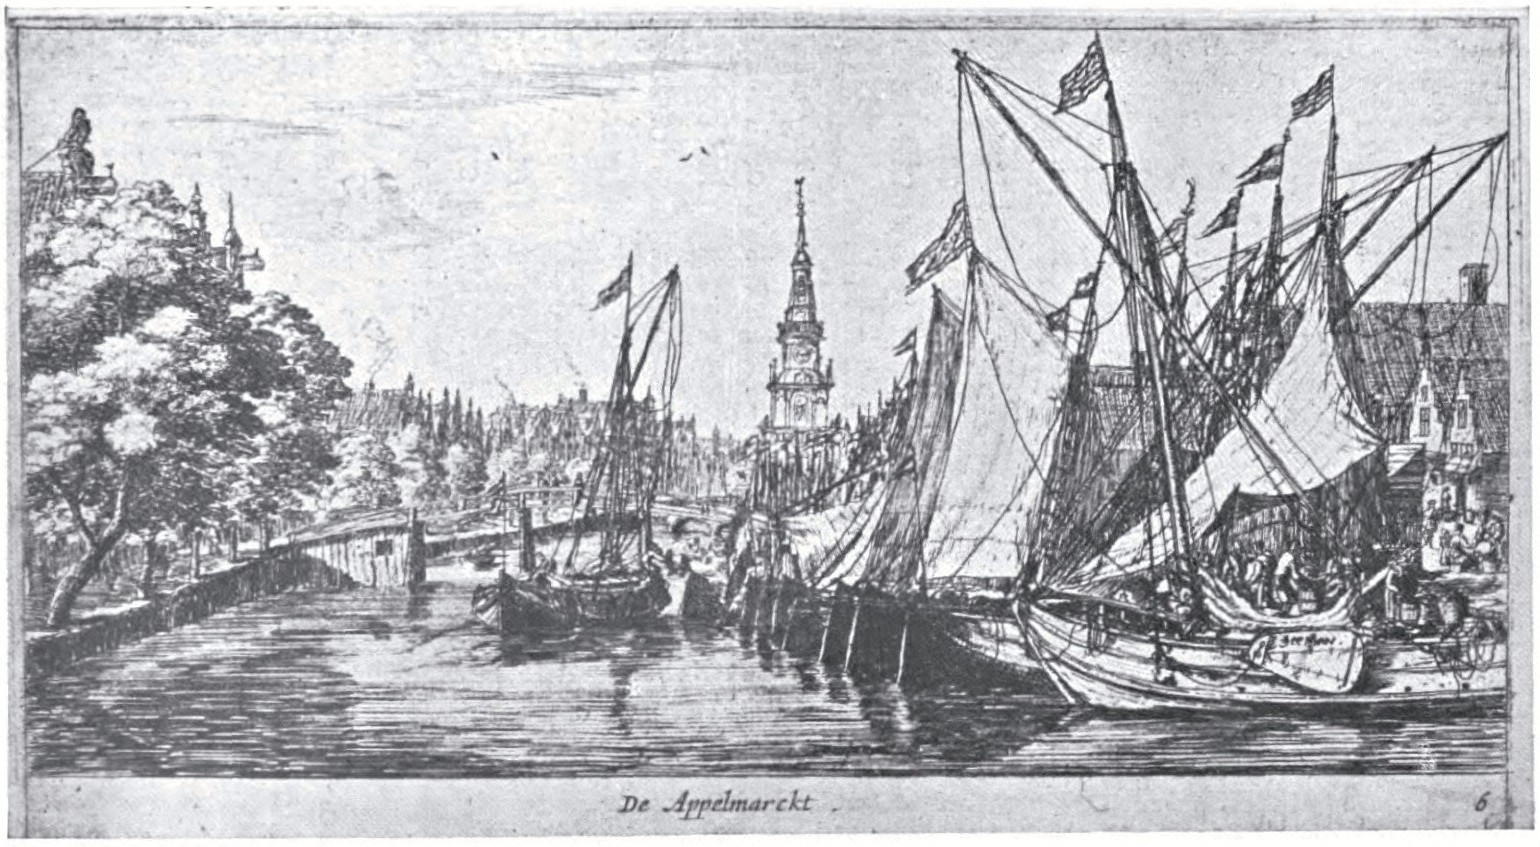 Plate 11. The Canal called “Singel” in Amsterdam.